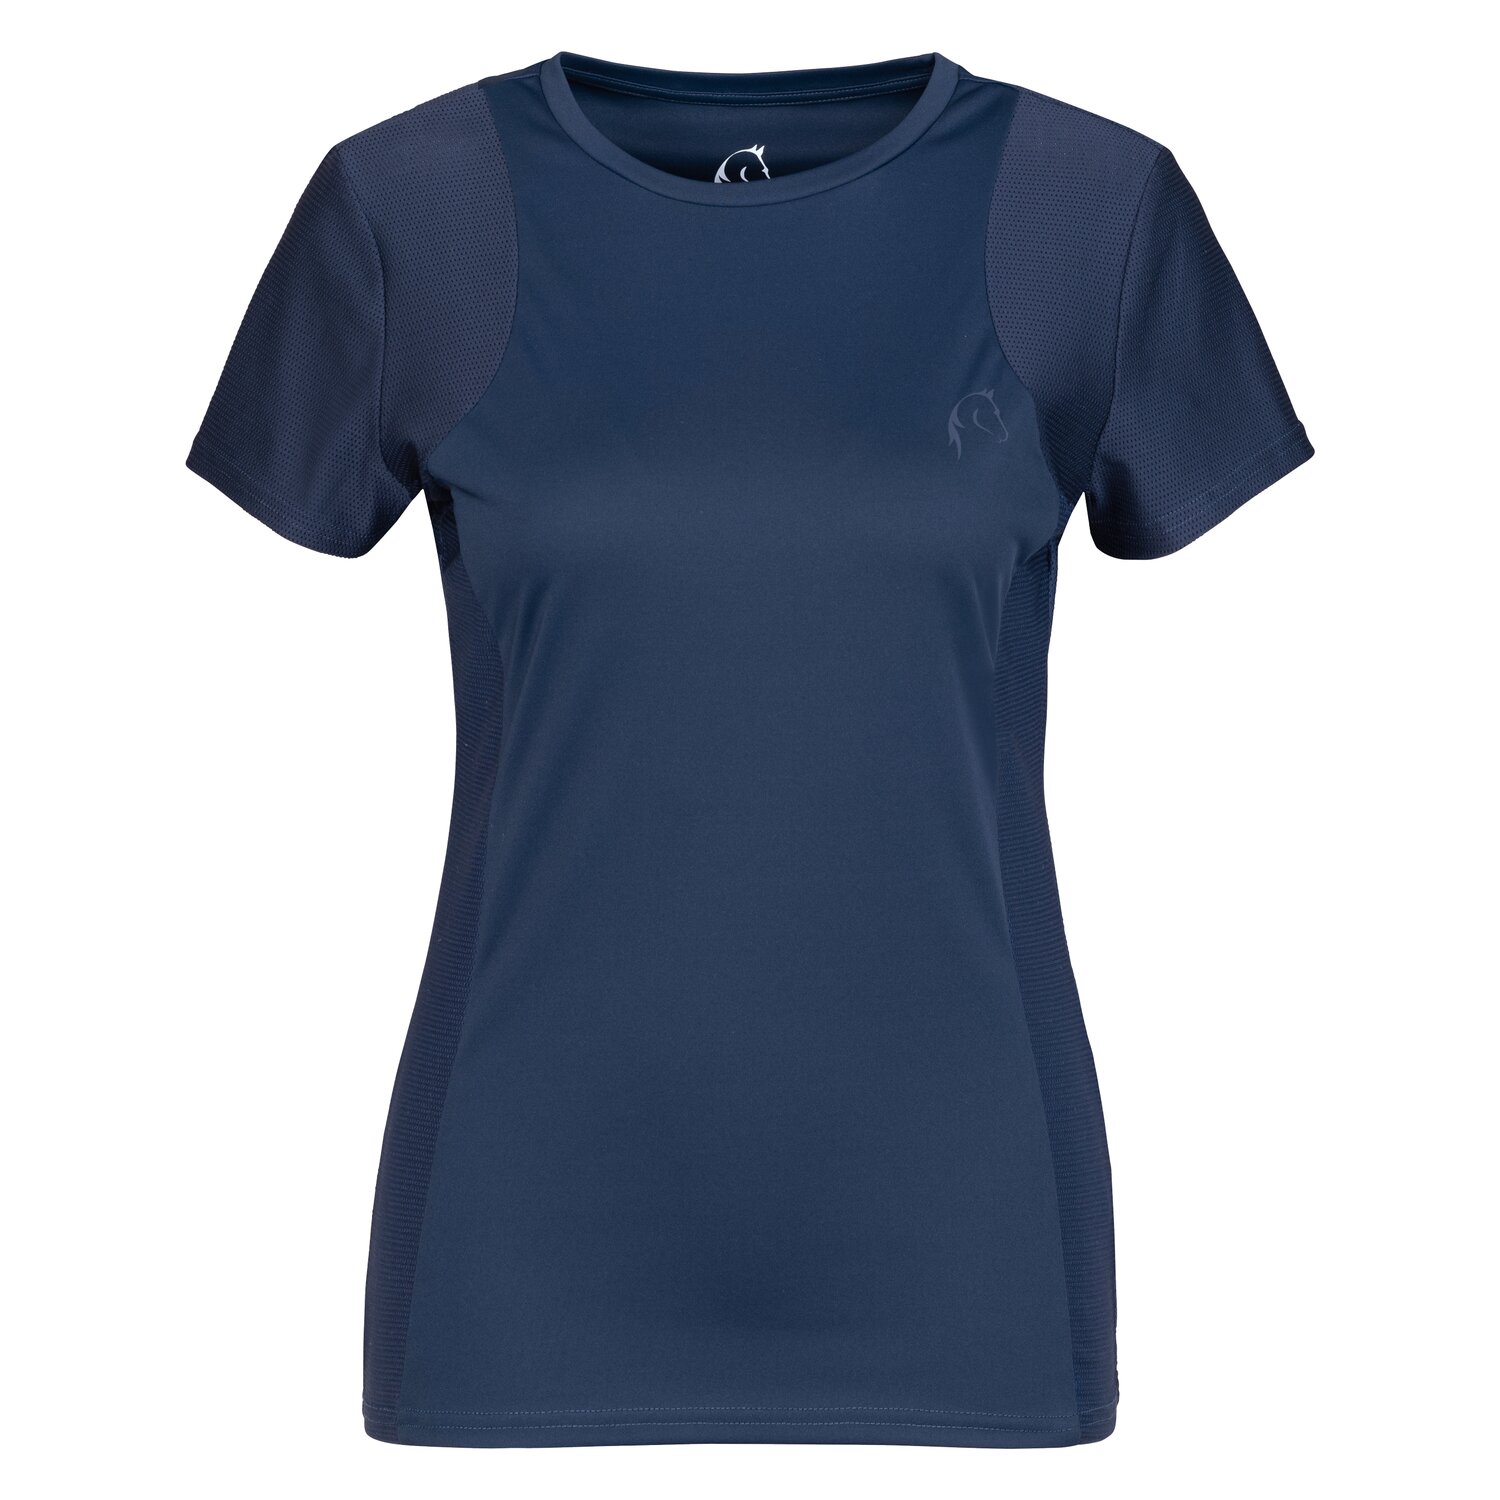 Cheval de Luxe Funktions-T-Shirt navy | XS